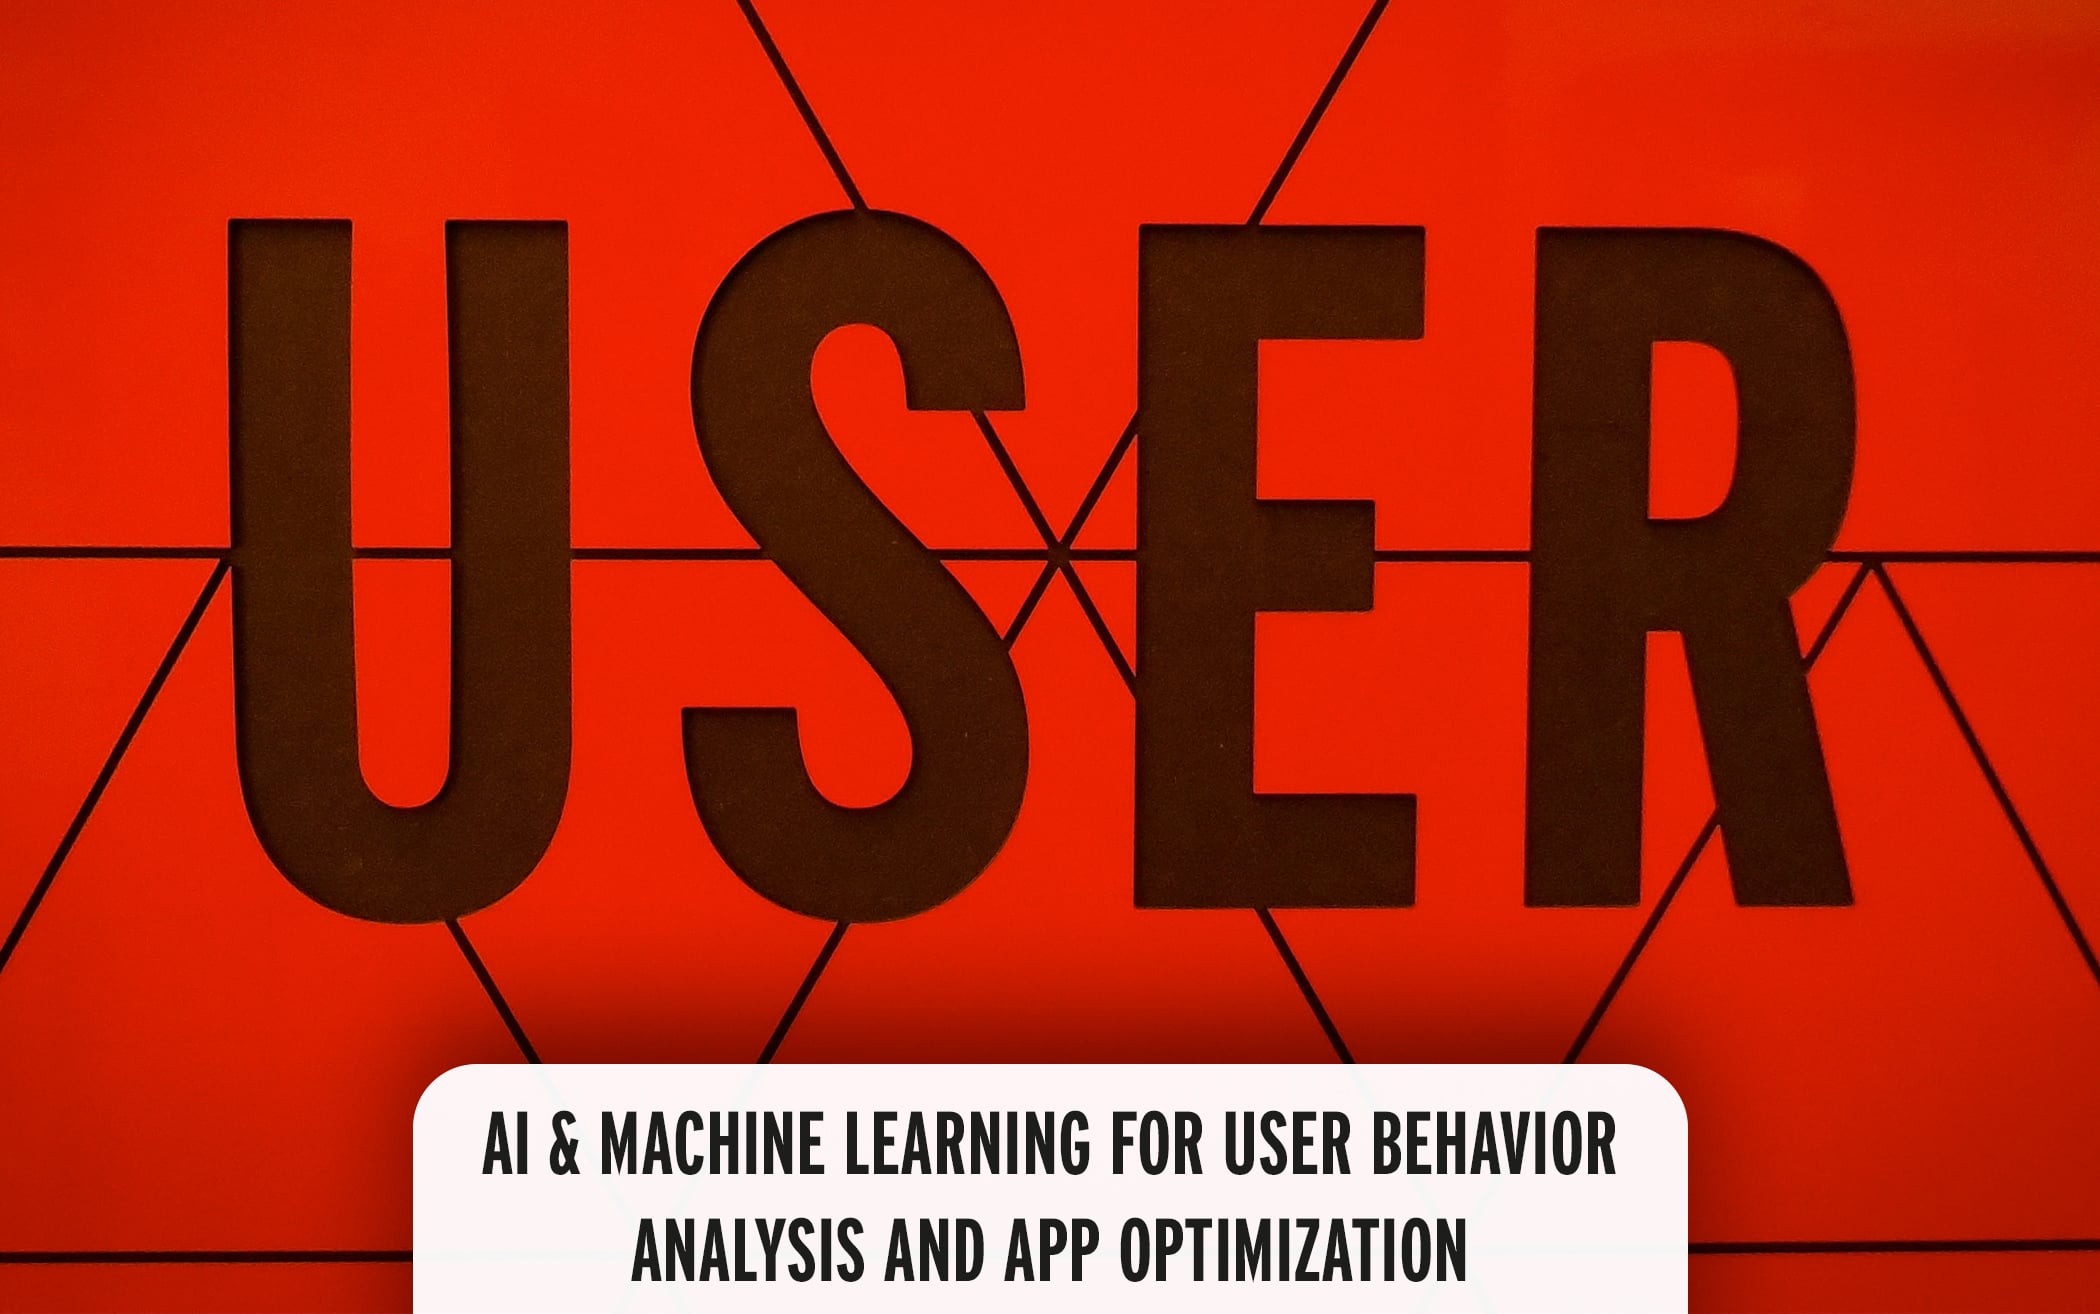 AI & Machine Learning for User Behavior Analysis and App Optimization